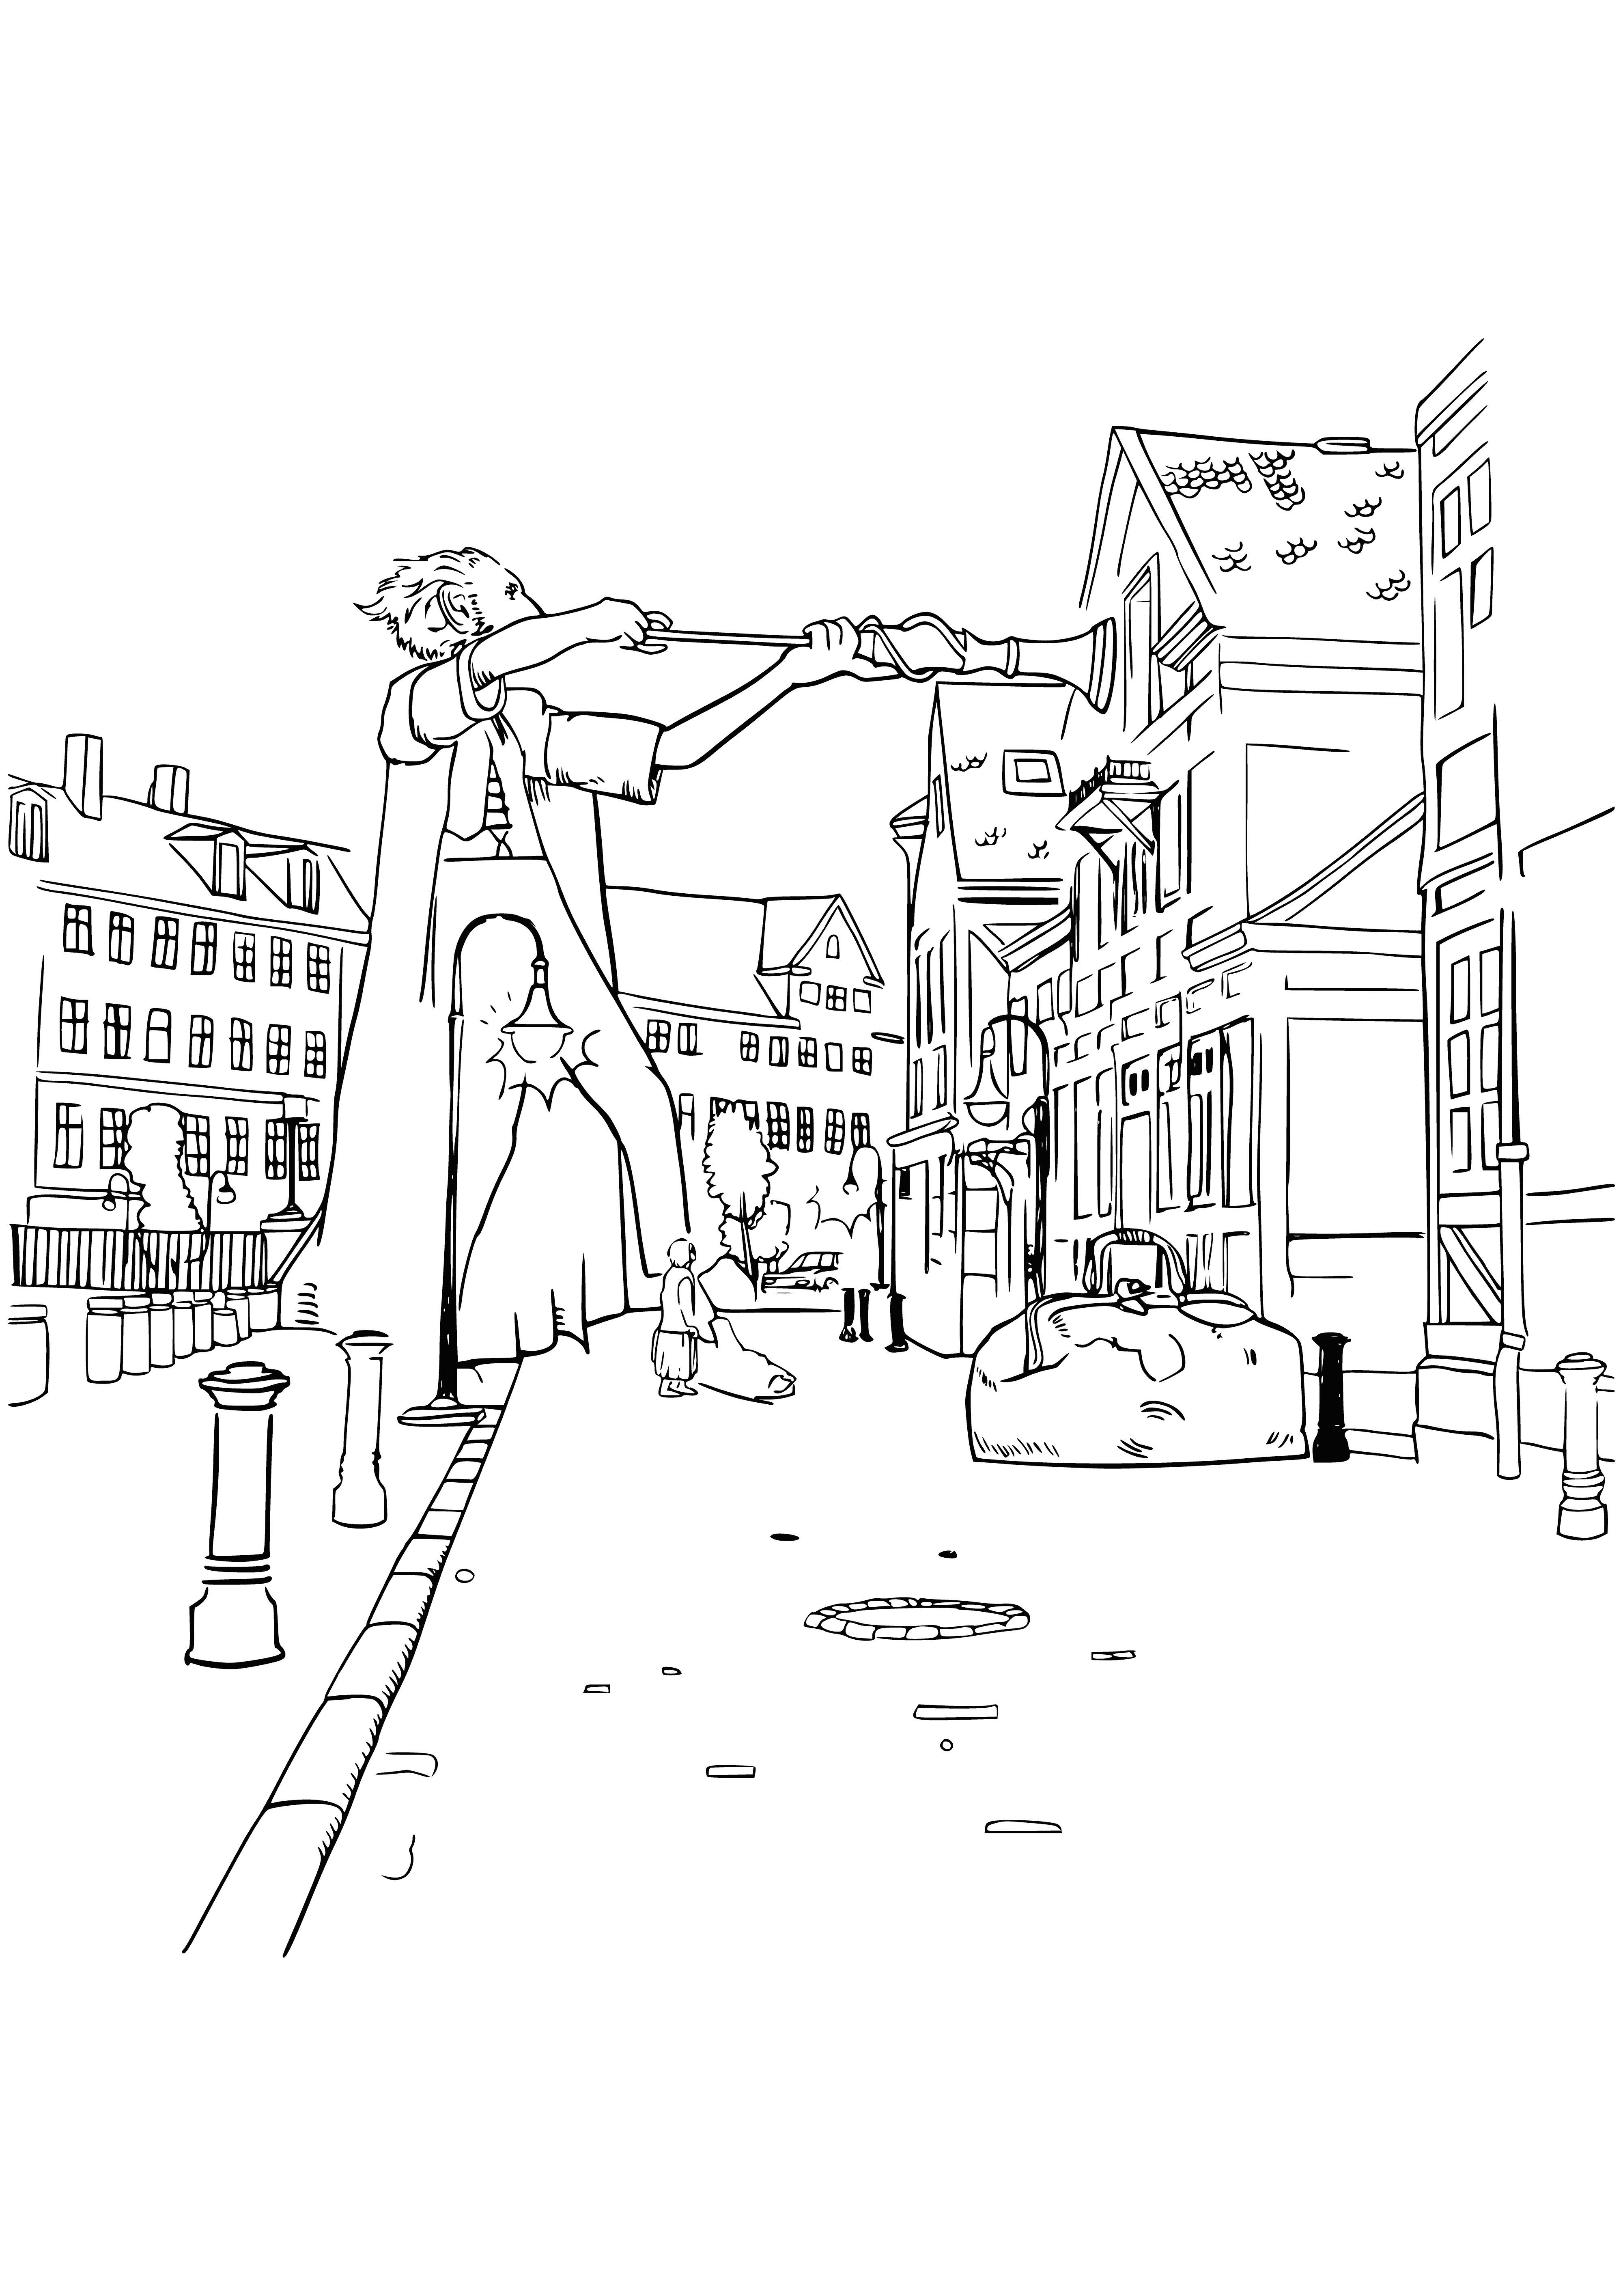 coloring page: Gentle giant carrying staff and sack towers above city, offering protection to its people.